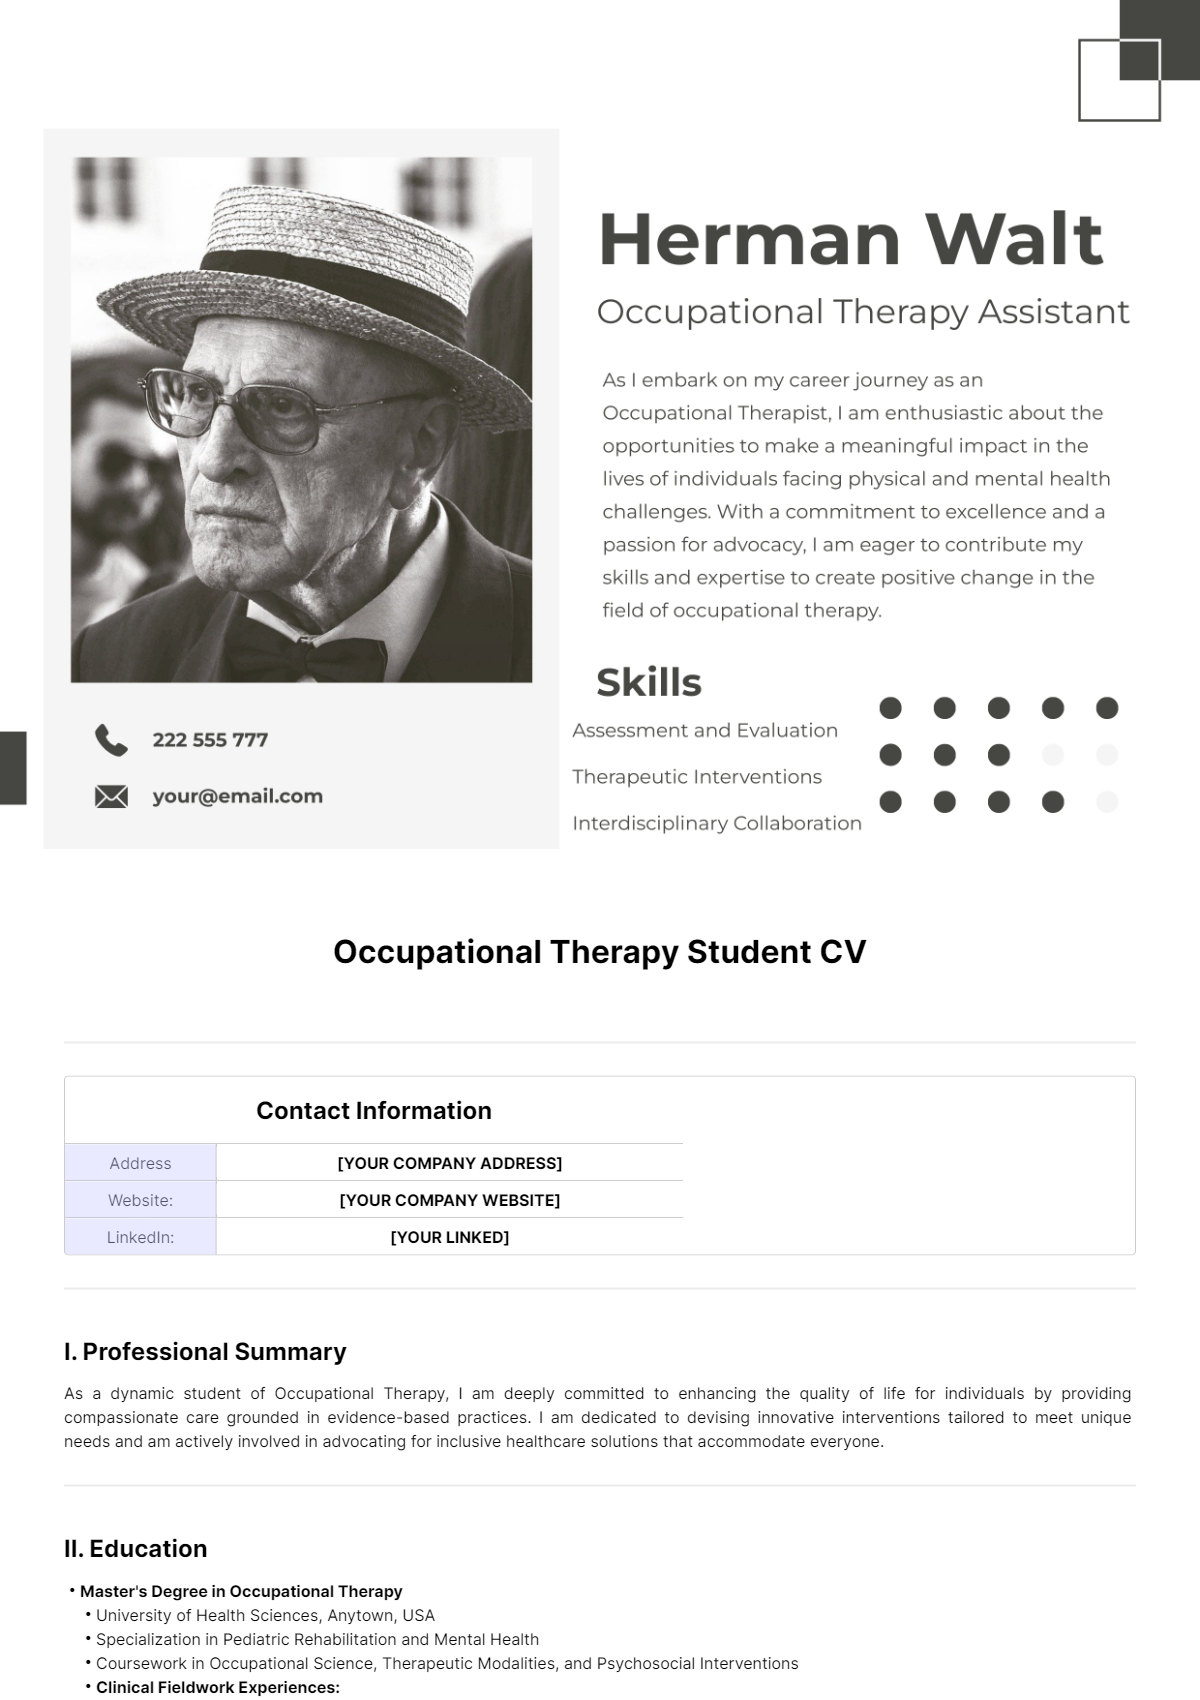 Free Occupational Therapy Student CV Template